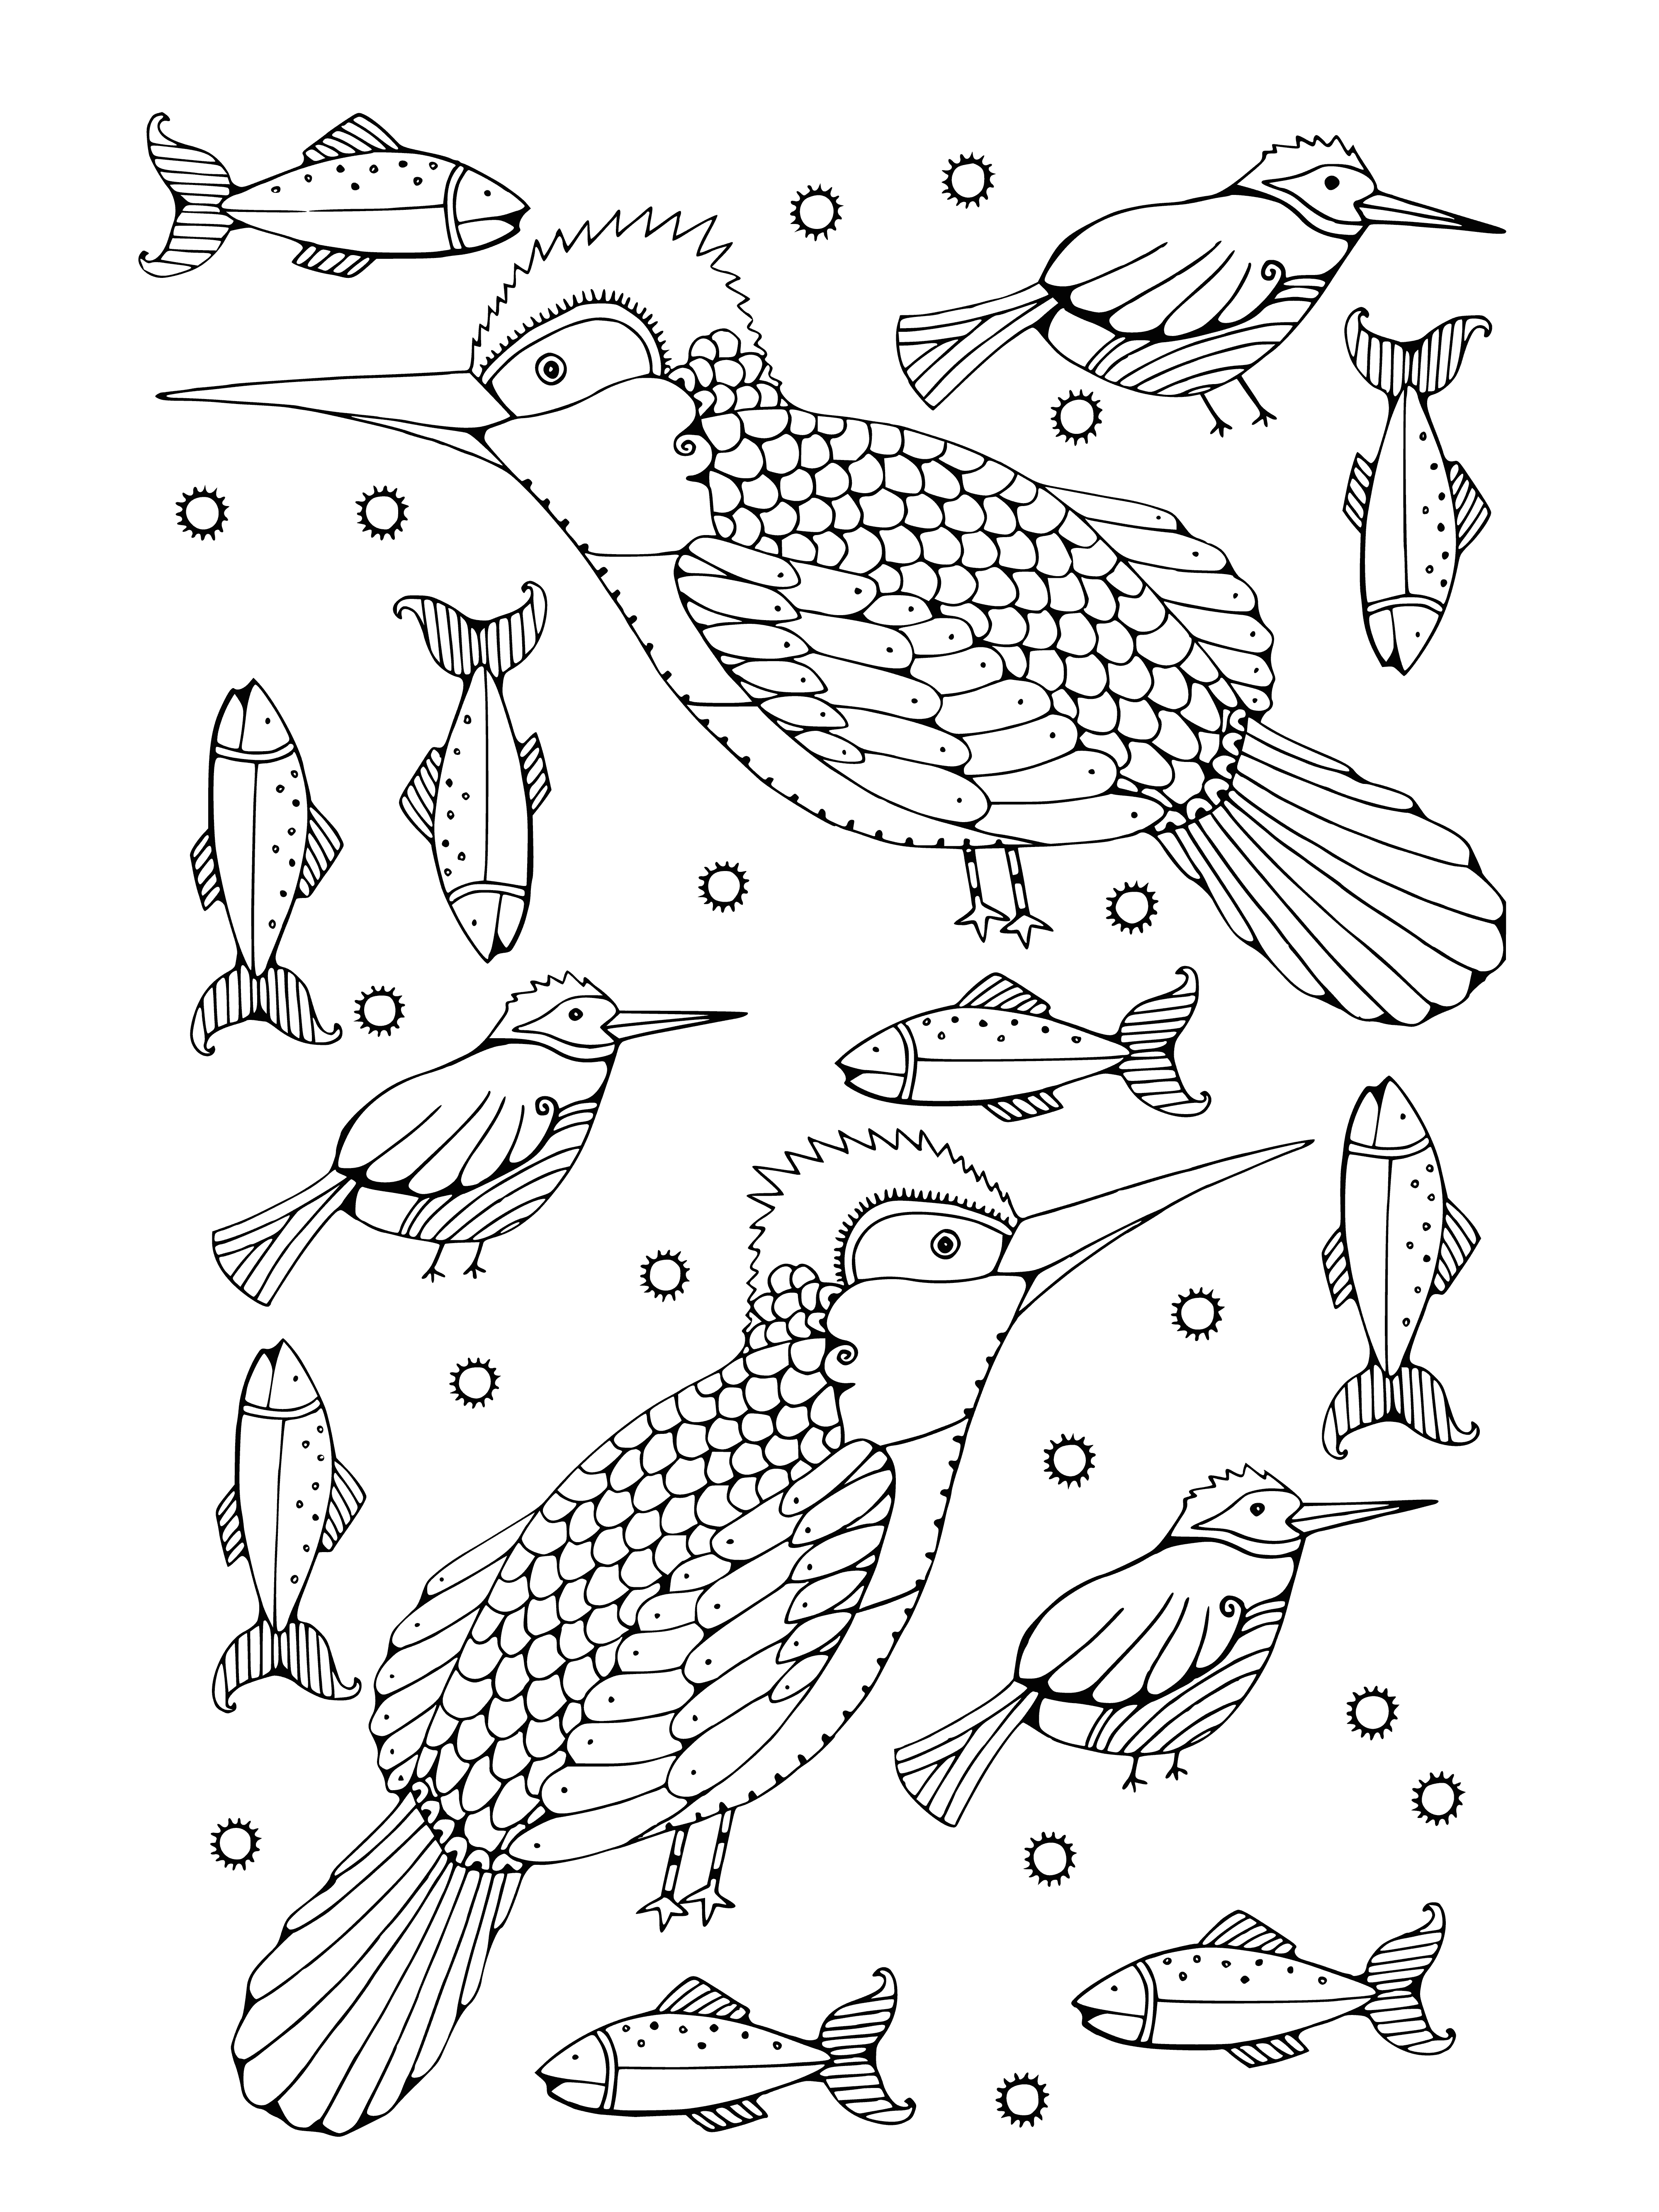 coloring page: Color a beautiful kingfisher perched on a tree branch with intricate patterns and leaves in the background. #coloringpages